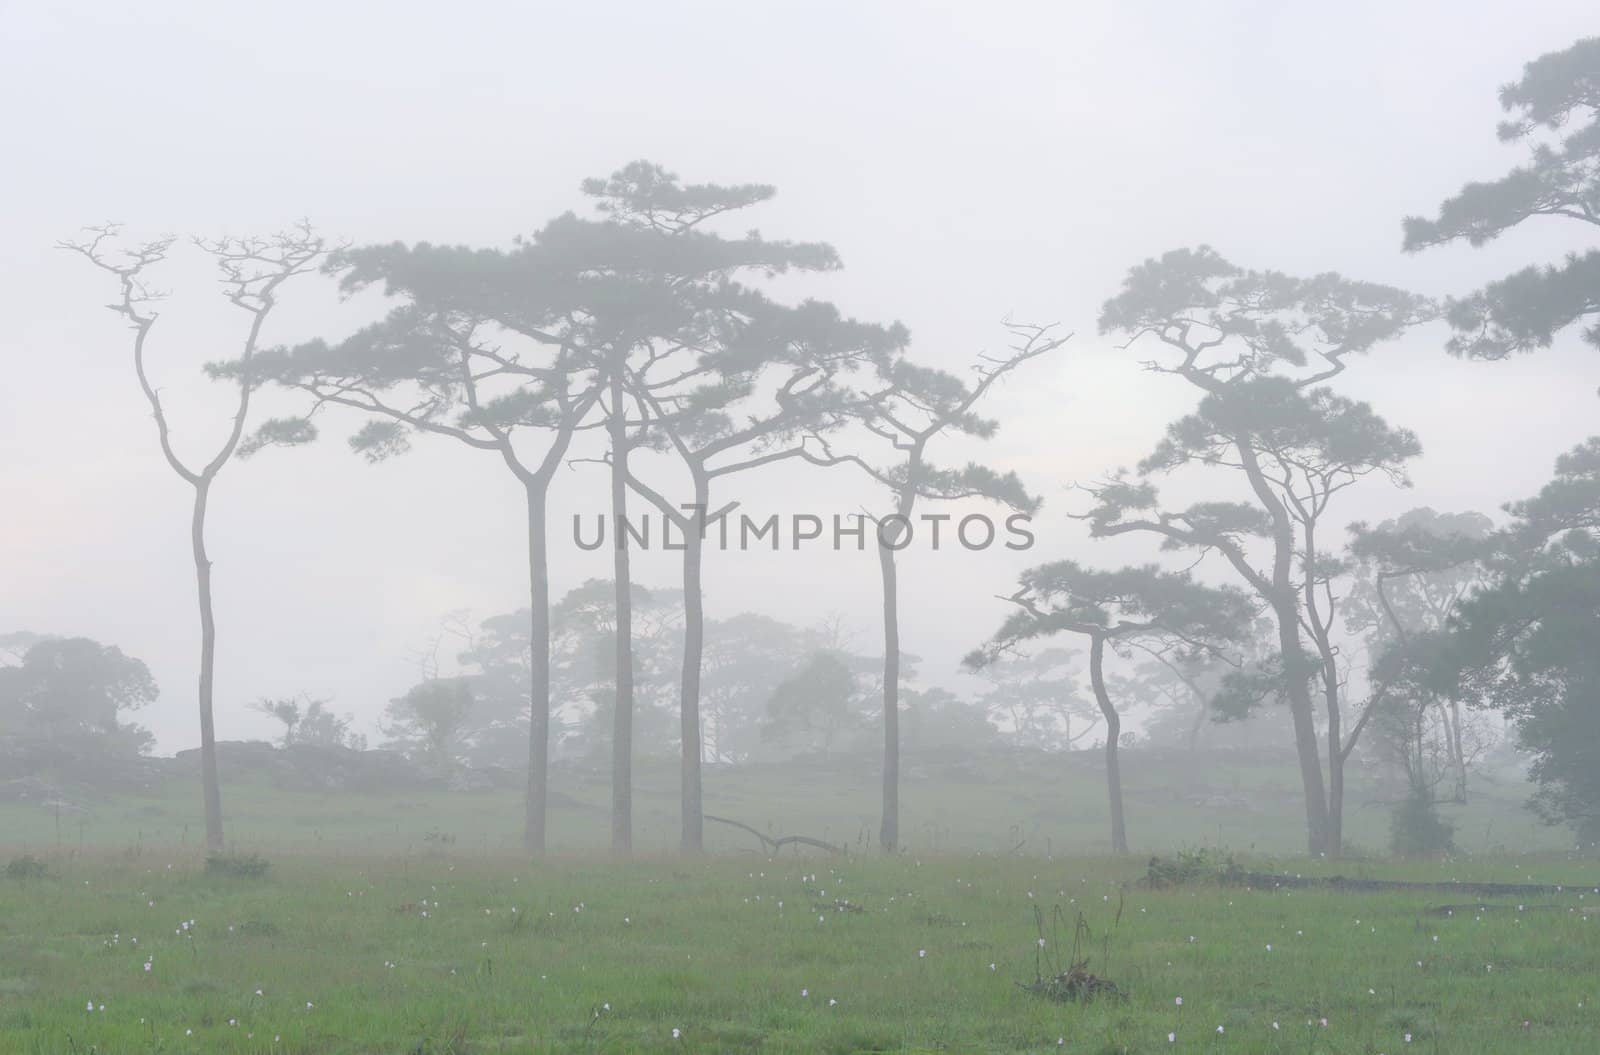 Mist flows through the trees in rain-forest. by ngungfoto